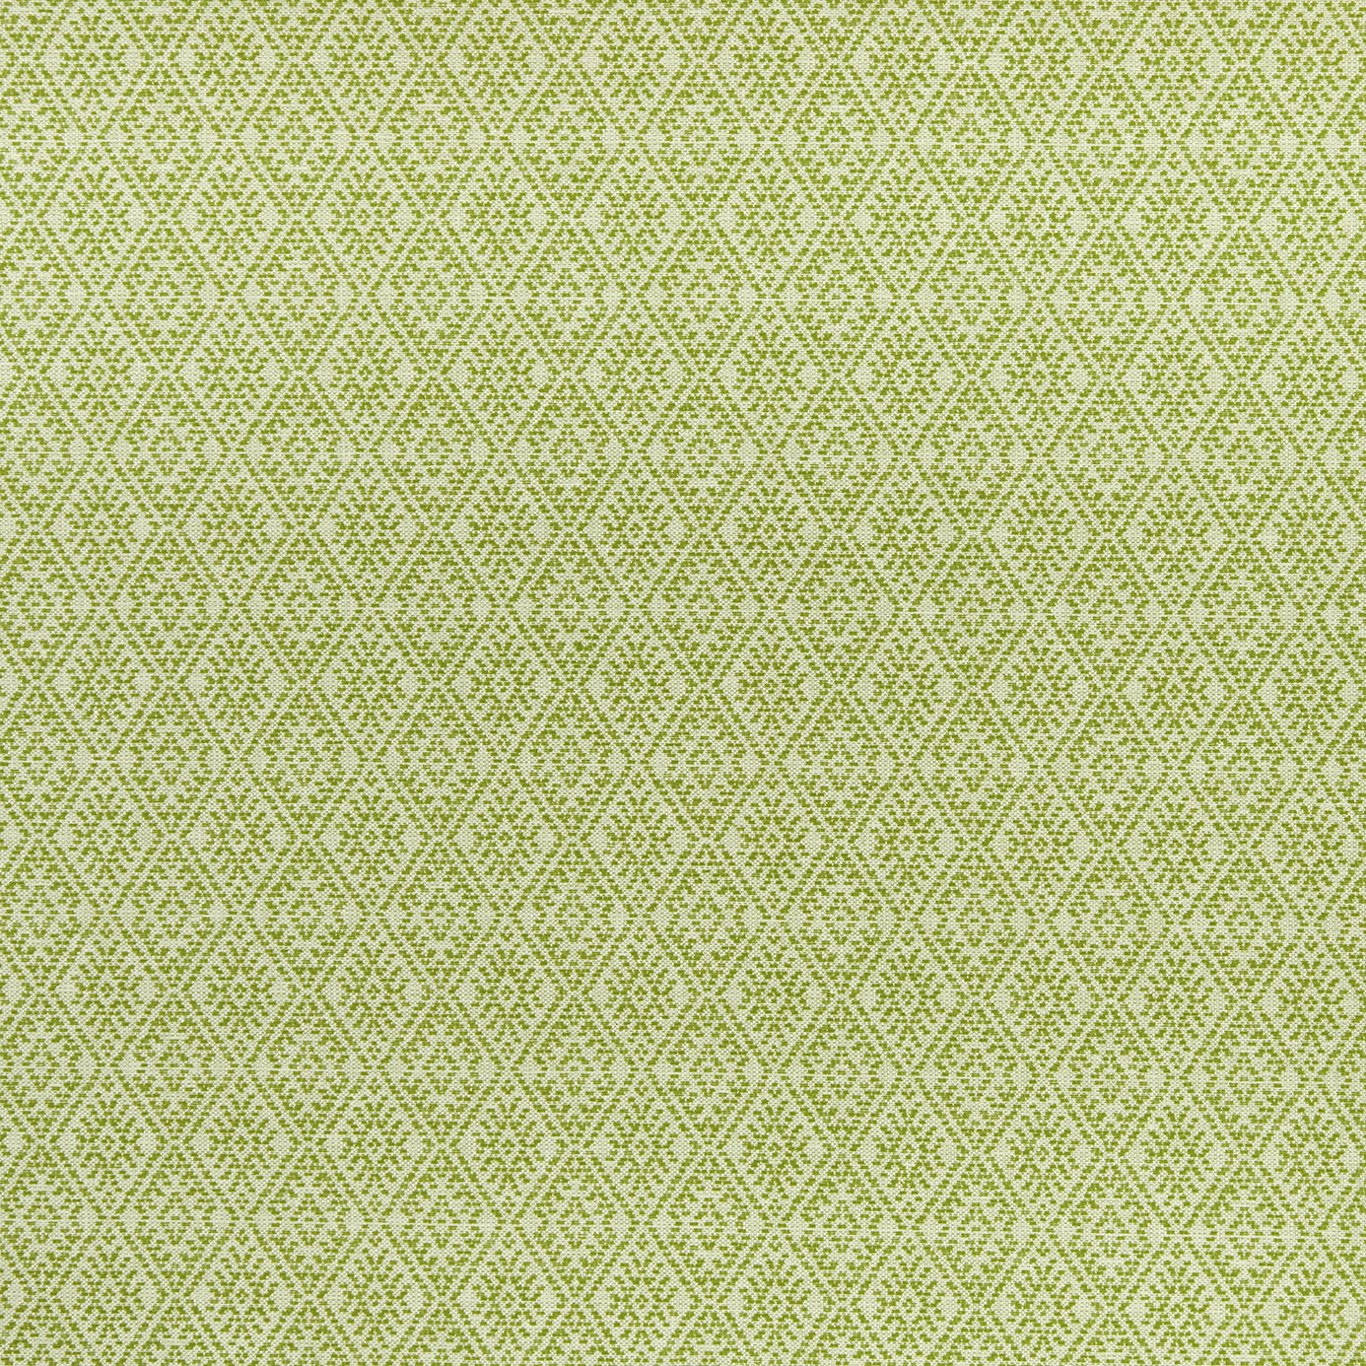 Hampstead Apple Fabric by CNC